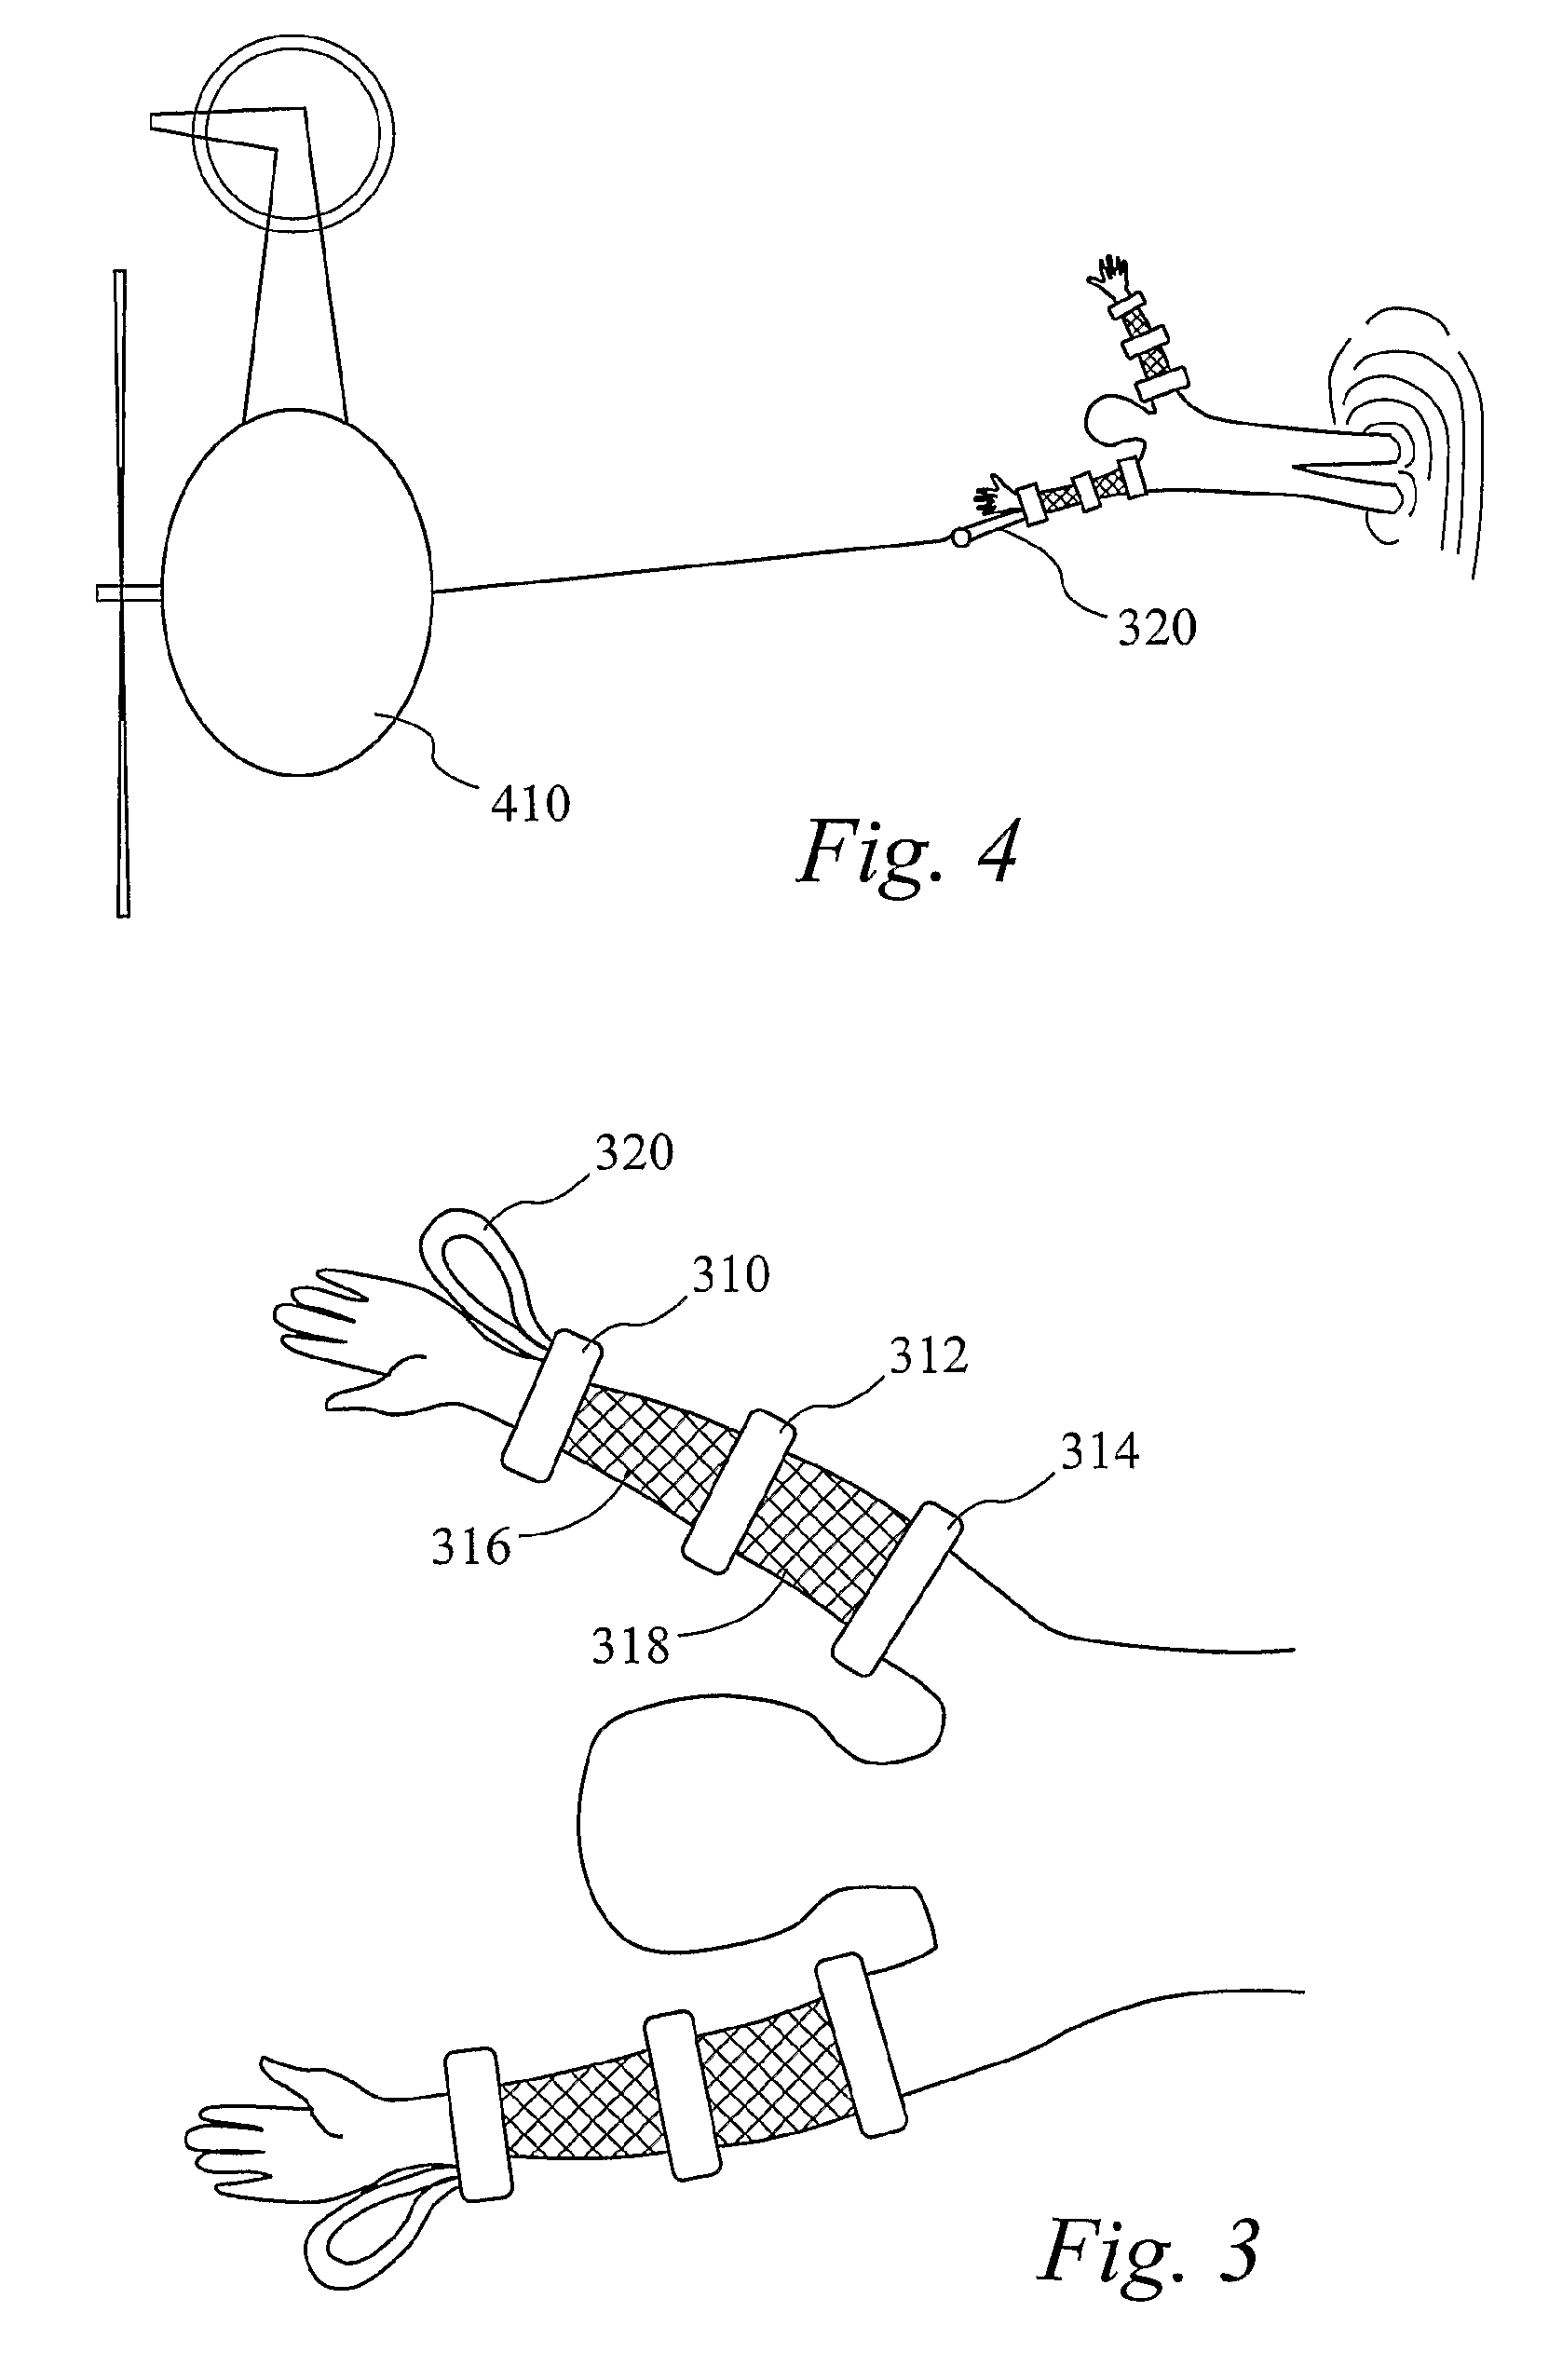 Buoyancy and rescue device